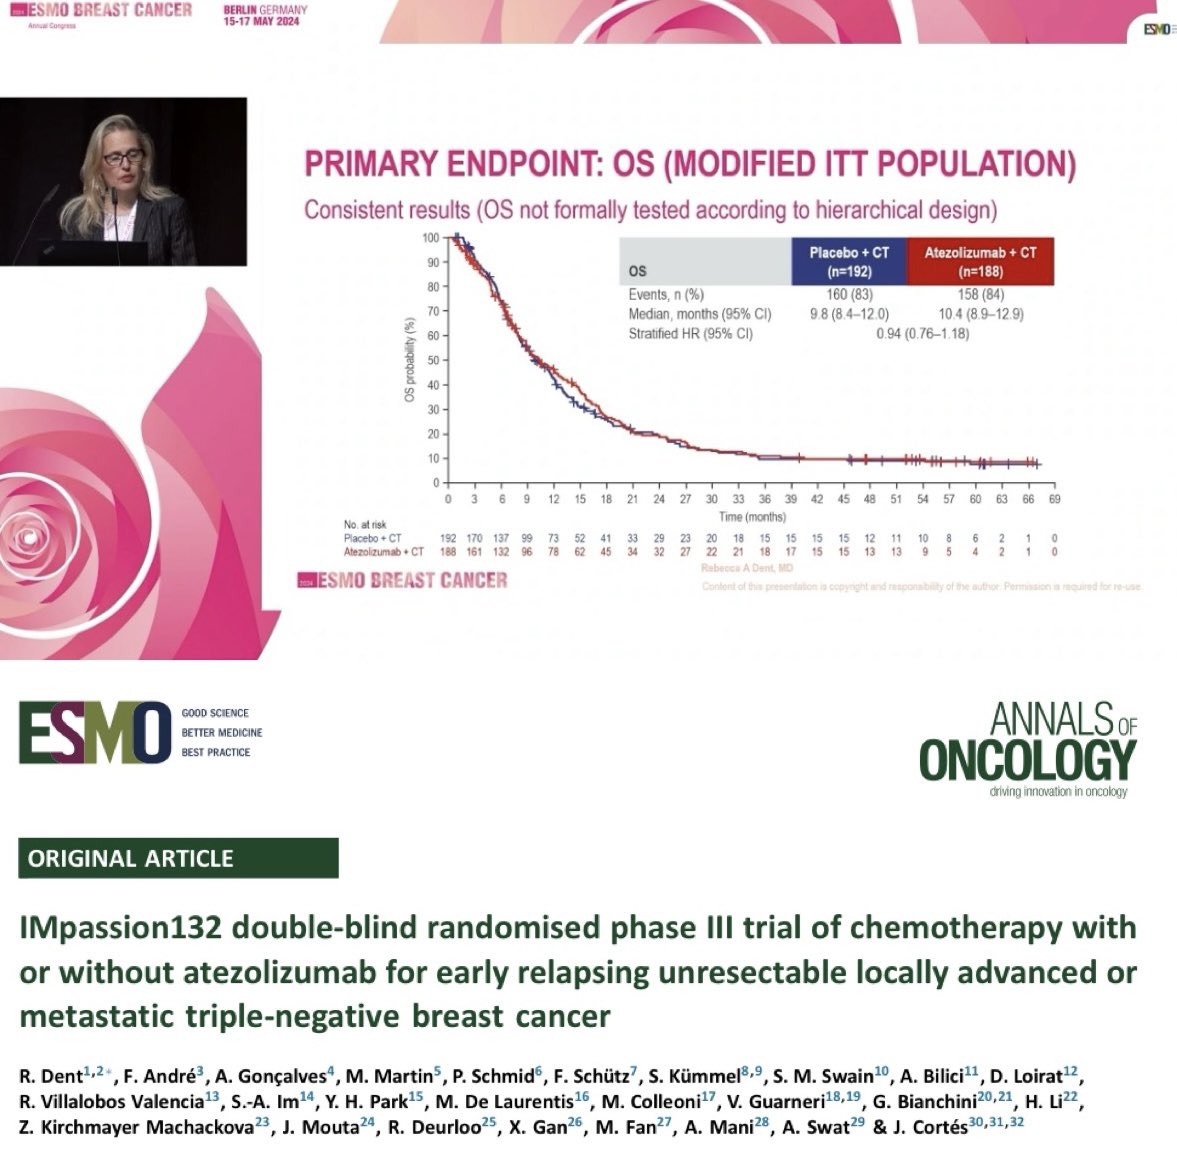 Rebecca Dent presents IMp132 at #ESMOBreast24. No OS ⬆️ by adding atezo to chemo for pts with early relapsed TNBC. Unfortunate results, highlighting the huge unmet need represented by these pts. A lot will be learned from the trial samples. Concomitant 📰: annalsofoncology.org/article/S0923-…